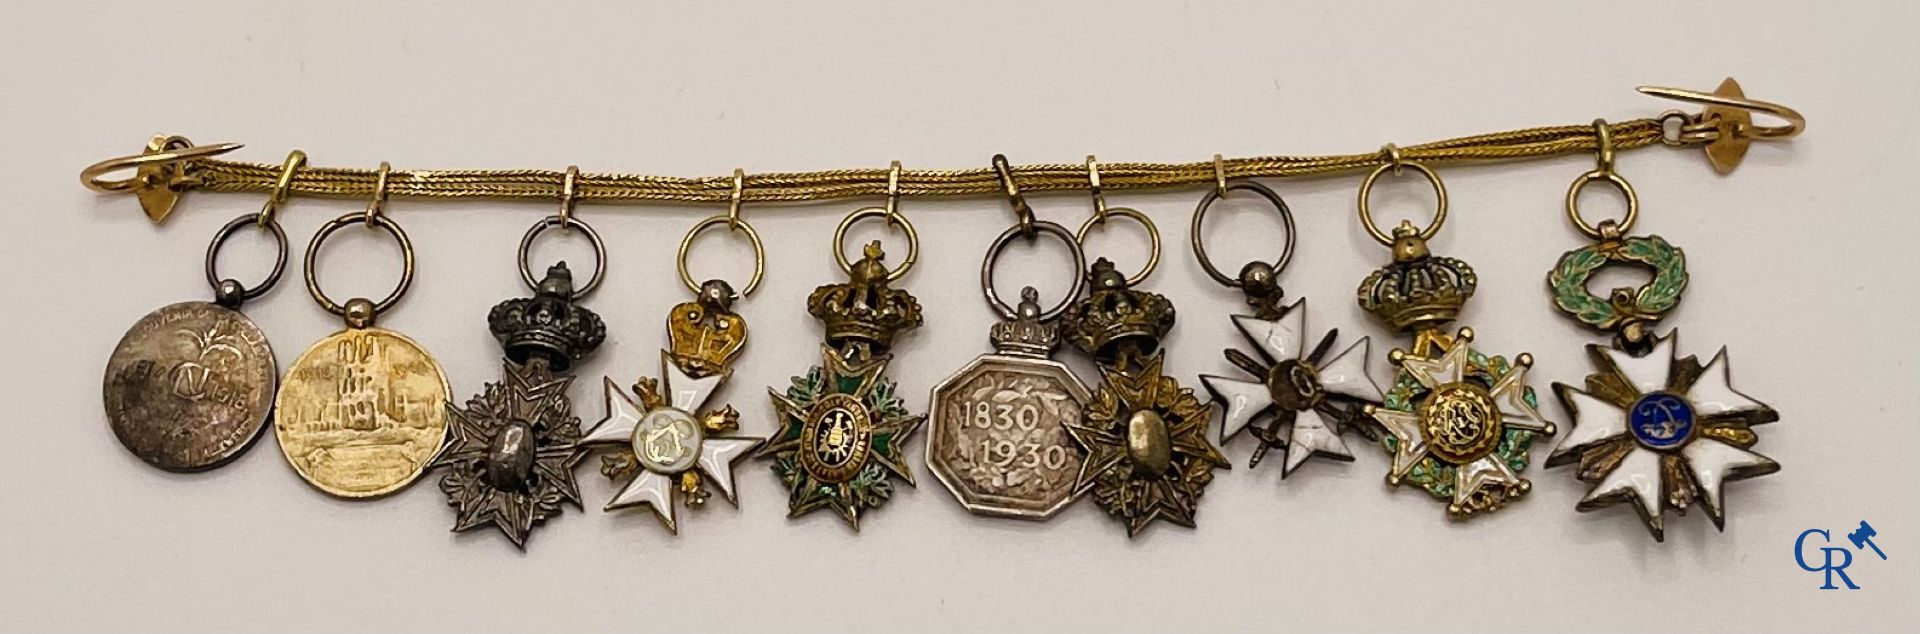 Medals / decorations: Lot of 3 miniature chaines of which 1 in gold 18K (750°/00) set with multiple  - Image 3 of 3